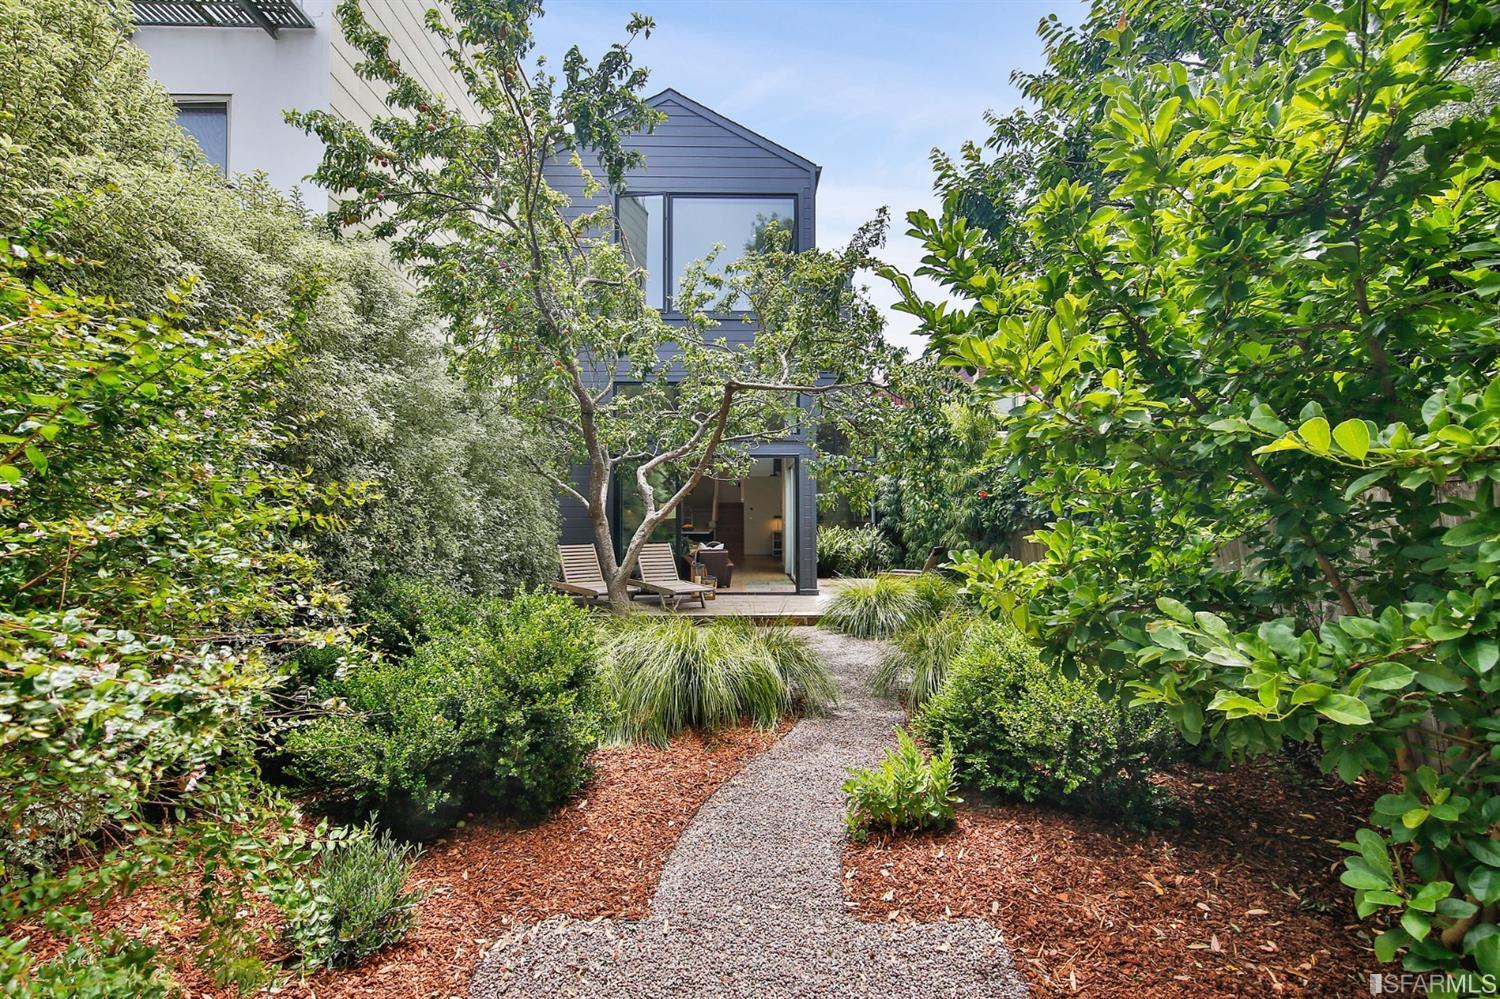 San Francisco Realty - Pathway leading up to back patio surrounded by greenery